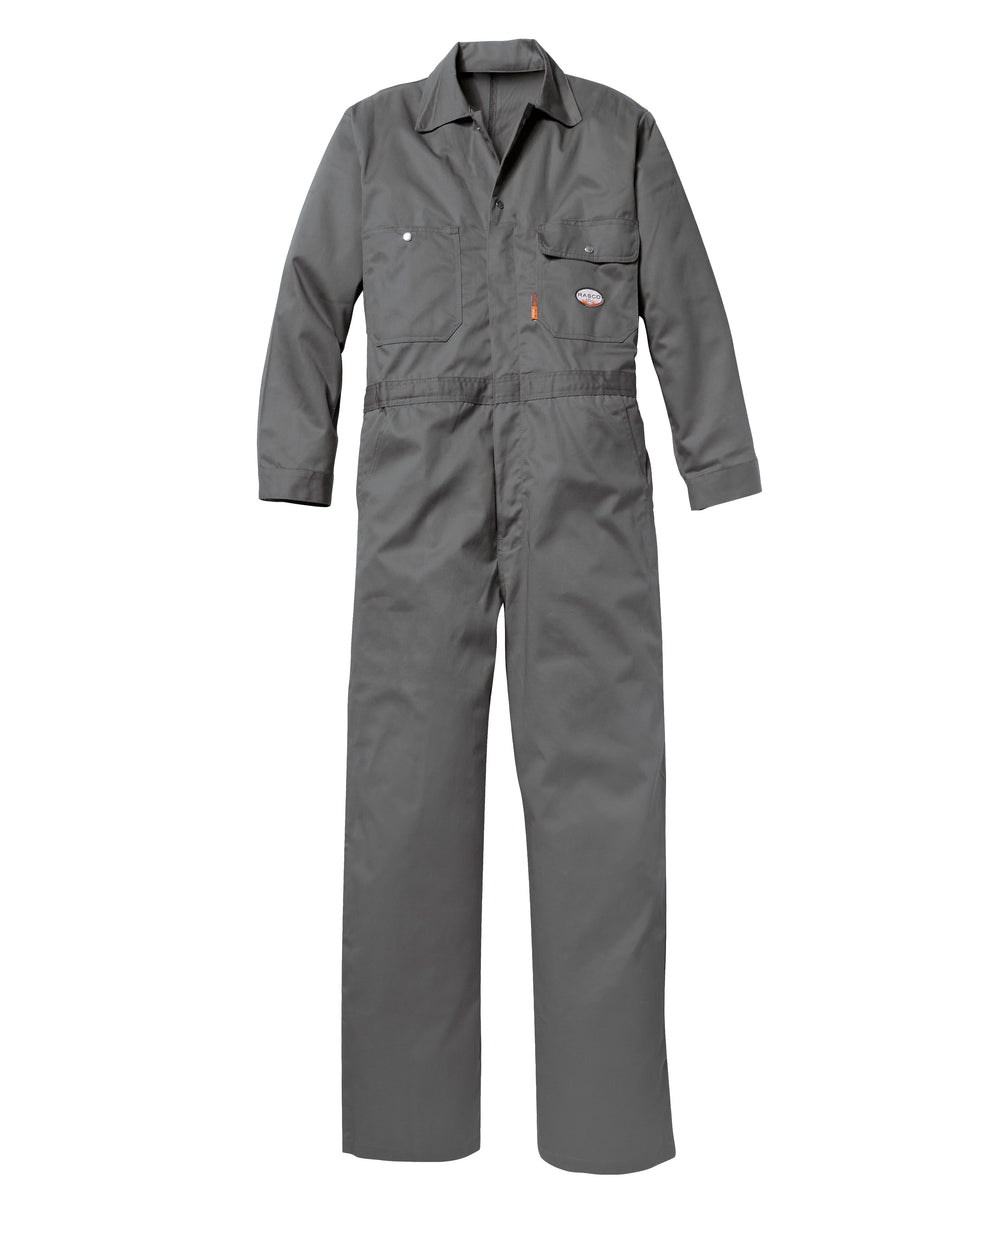 Rasco FR Flame Resistant Gray 7.5oz Coverall - FR2803GY